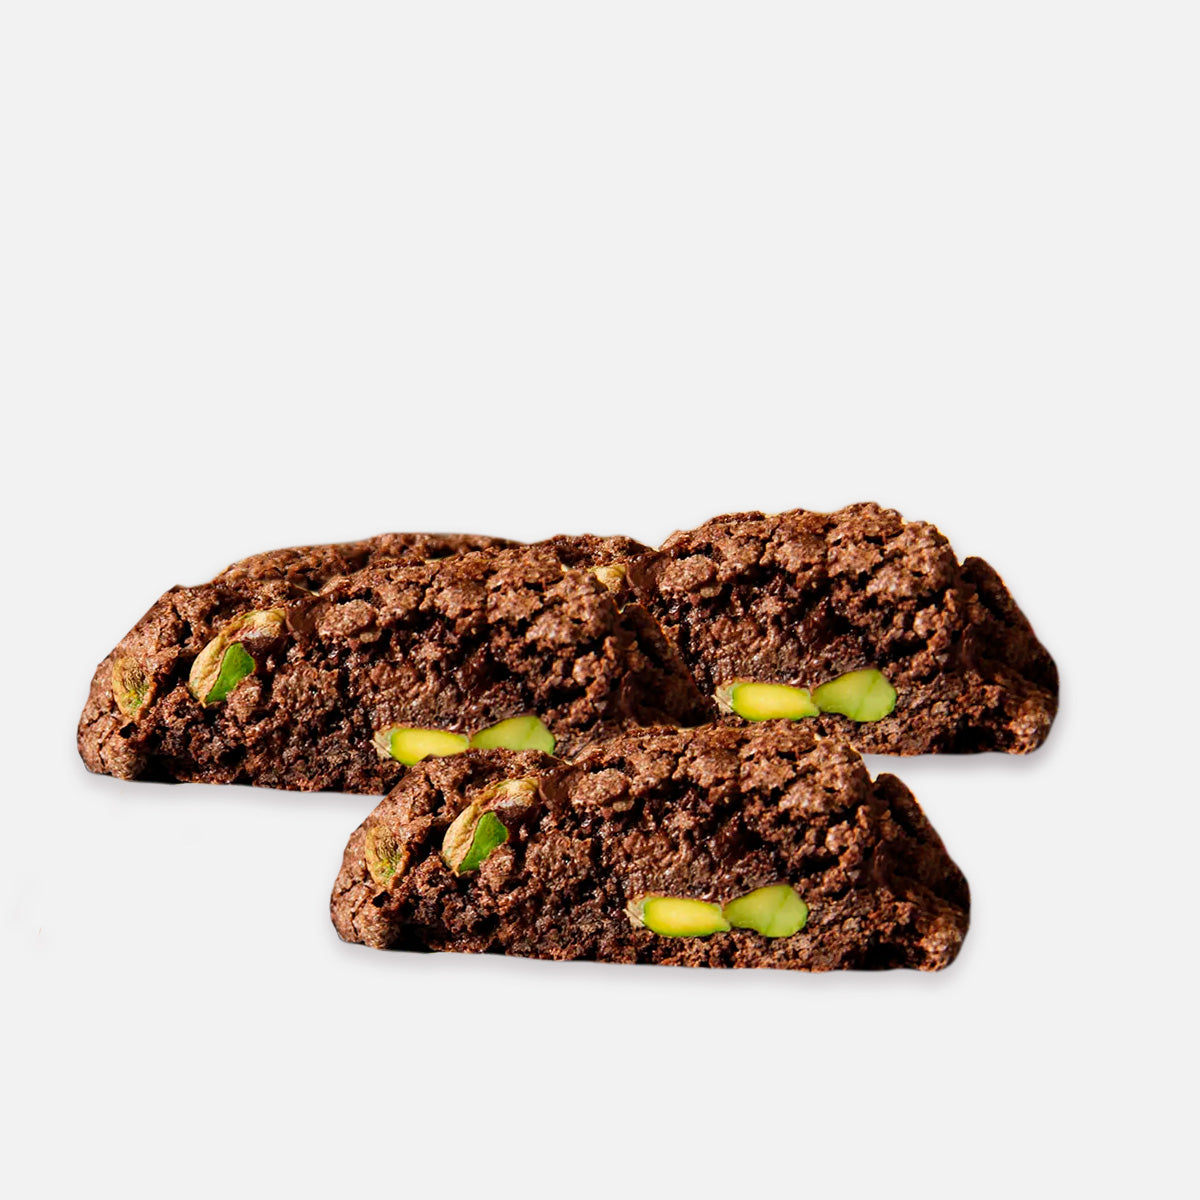 Tuscan Cantucci Chocolate Pistachio: Decadent Italian Biscuits